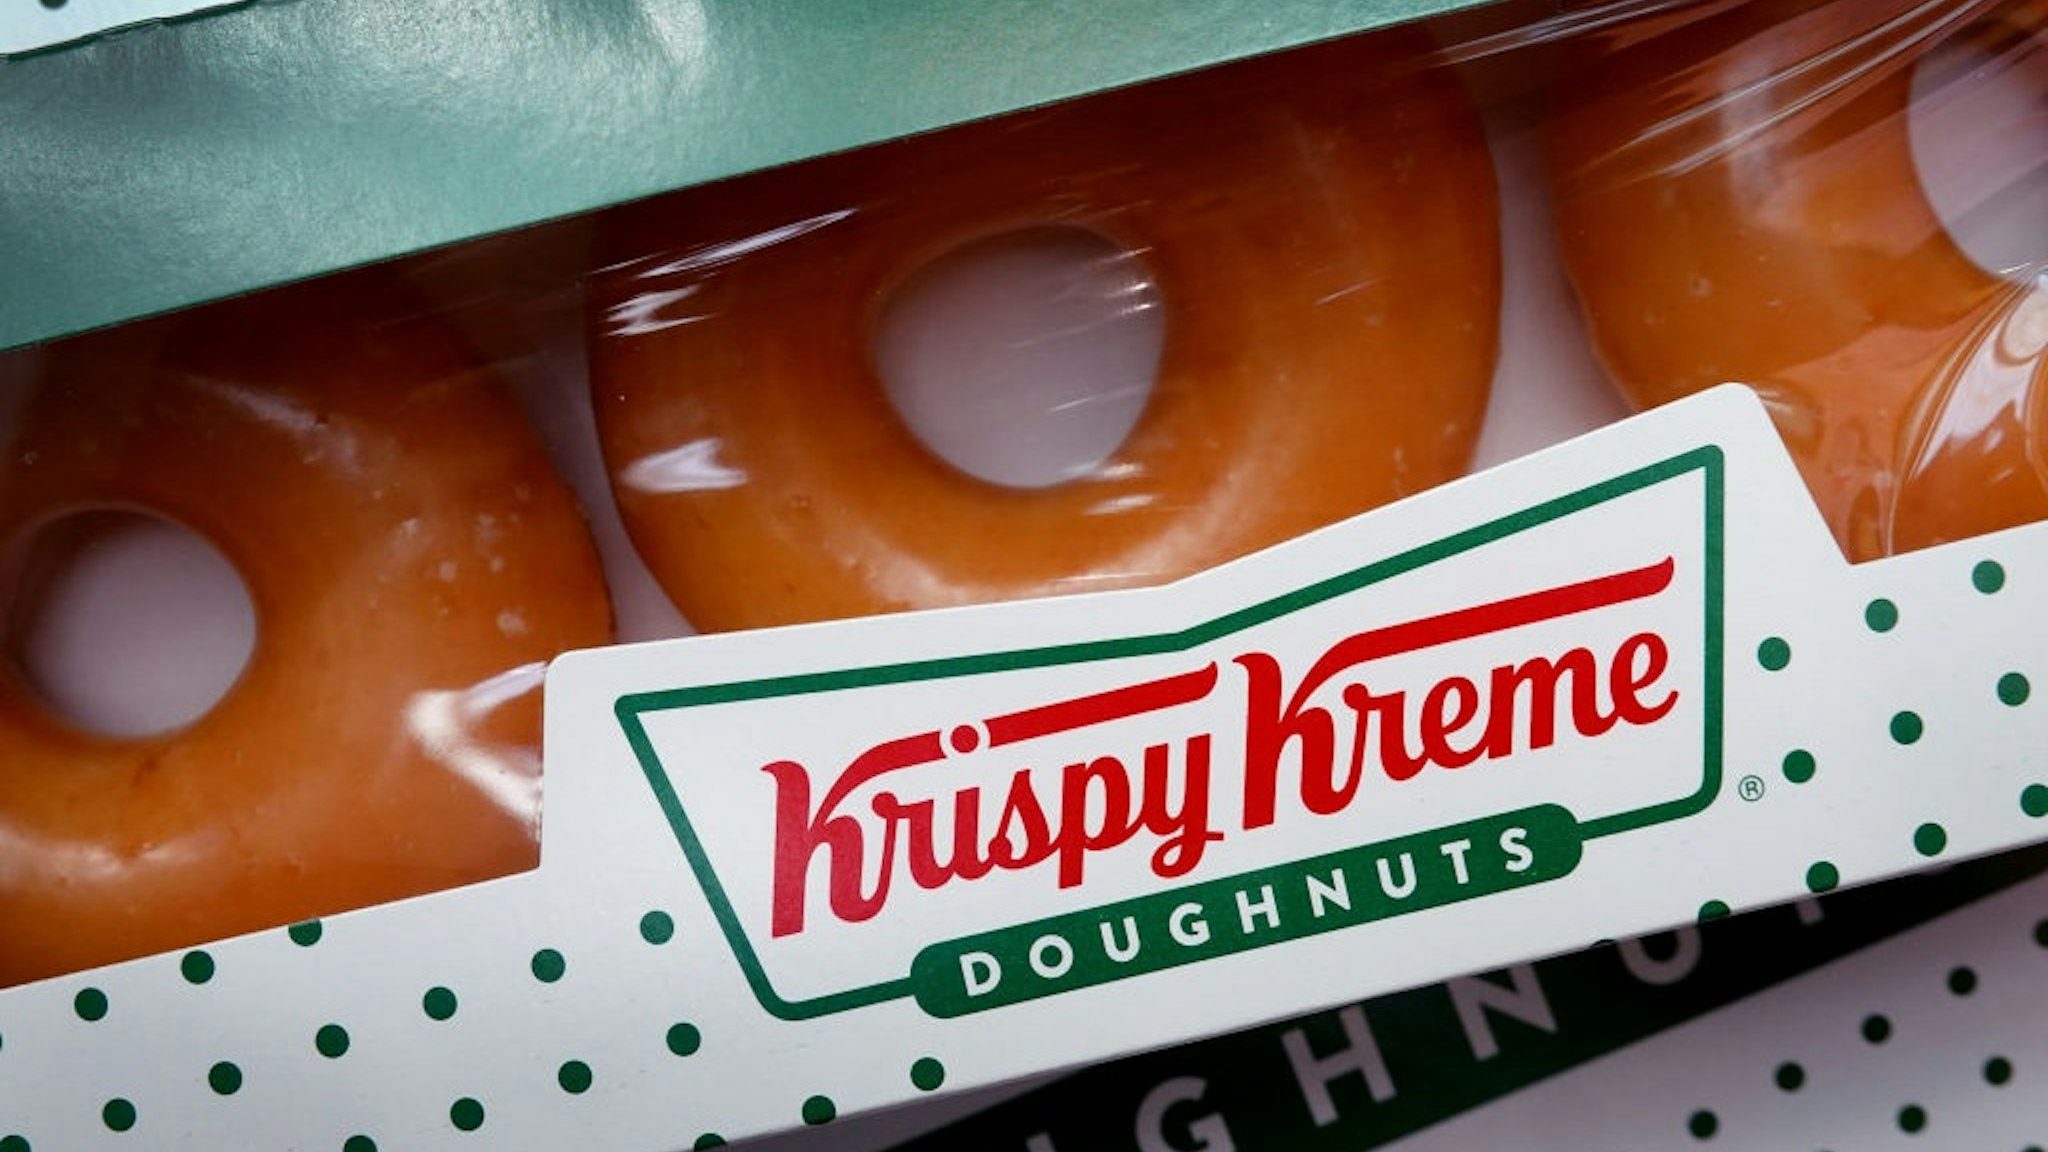 CHICAGO, ILLINOIS - MAY 05: Doughnuts are sold at a Krispy Kreme store on May 05, 2021 in Chicago, Illinois.